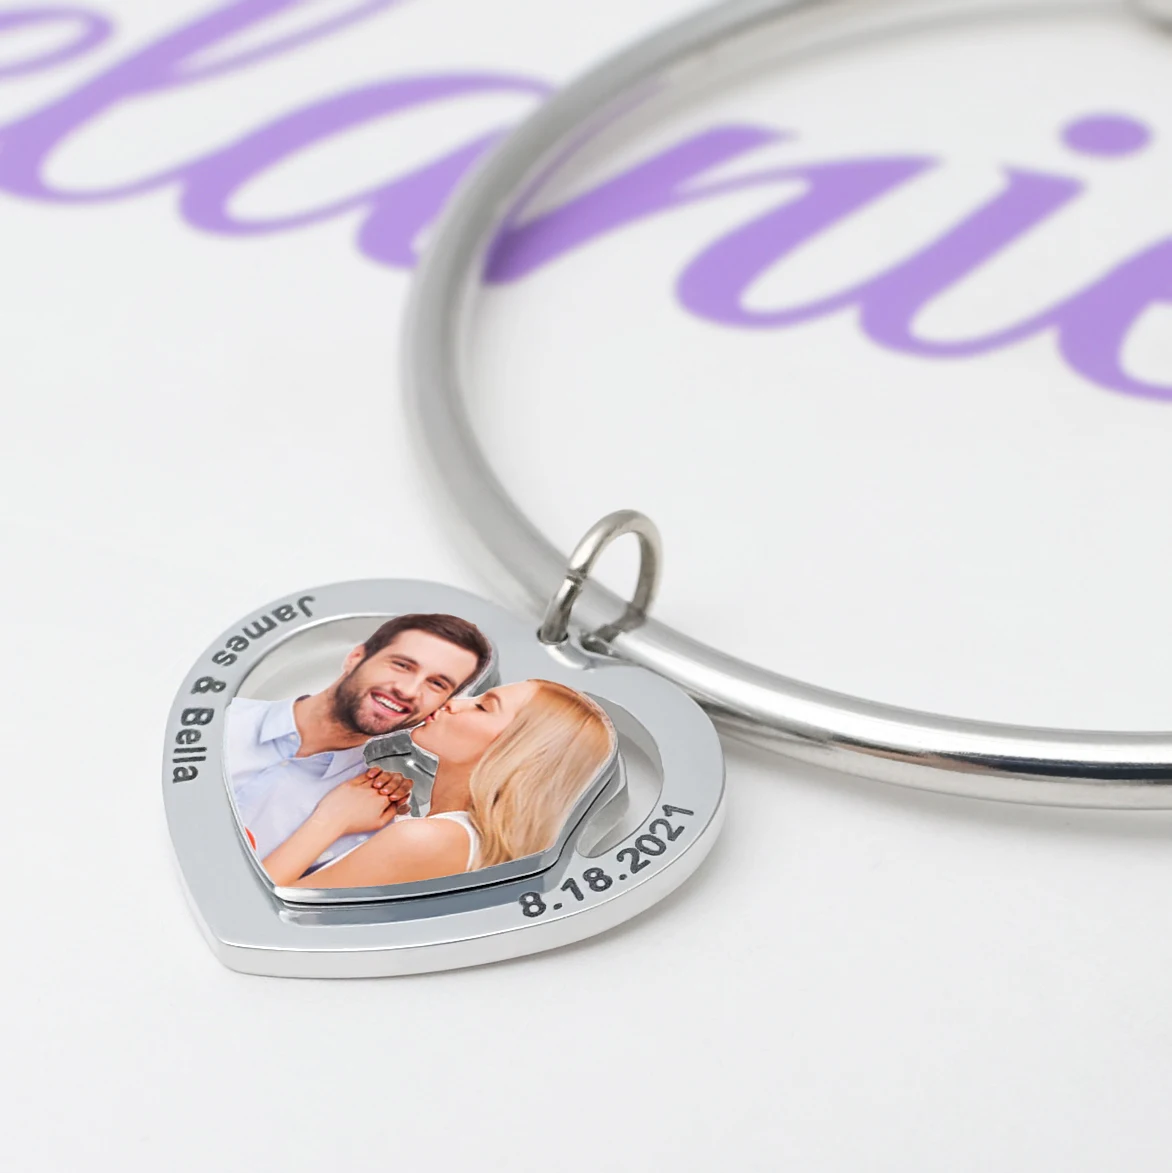 

Personalized Photo Bangle,Customized Bracelet Engrave Photo Name Date,Heart Shape Picture Bangles,Anniversary Gift for Her